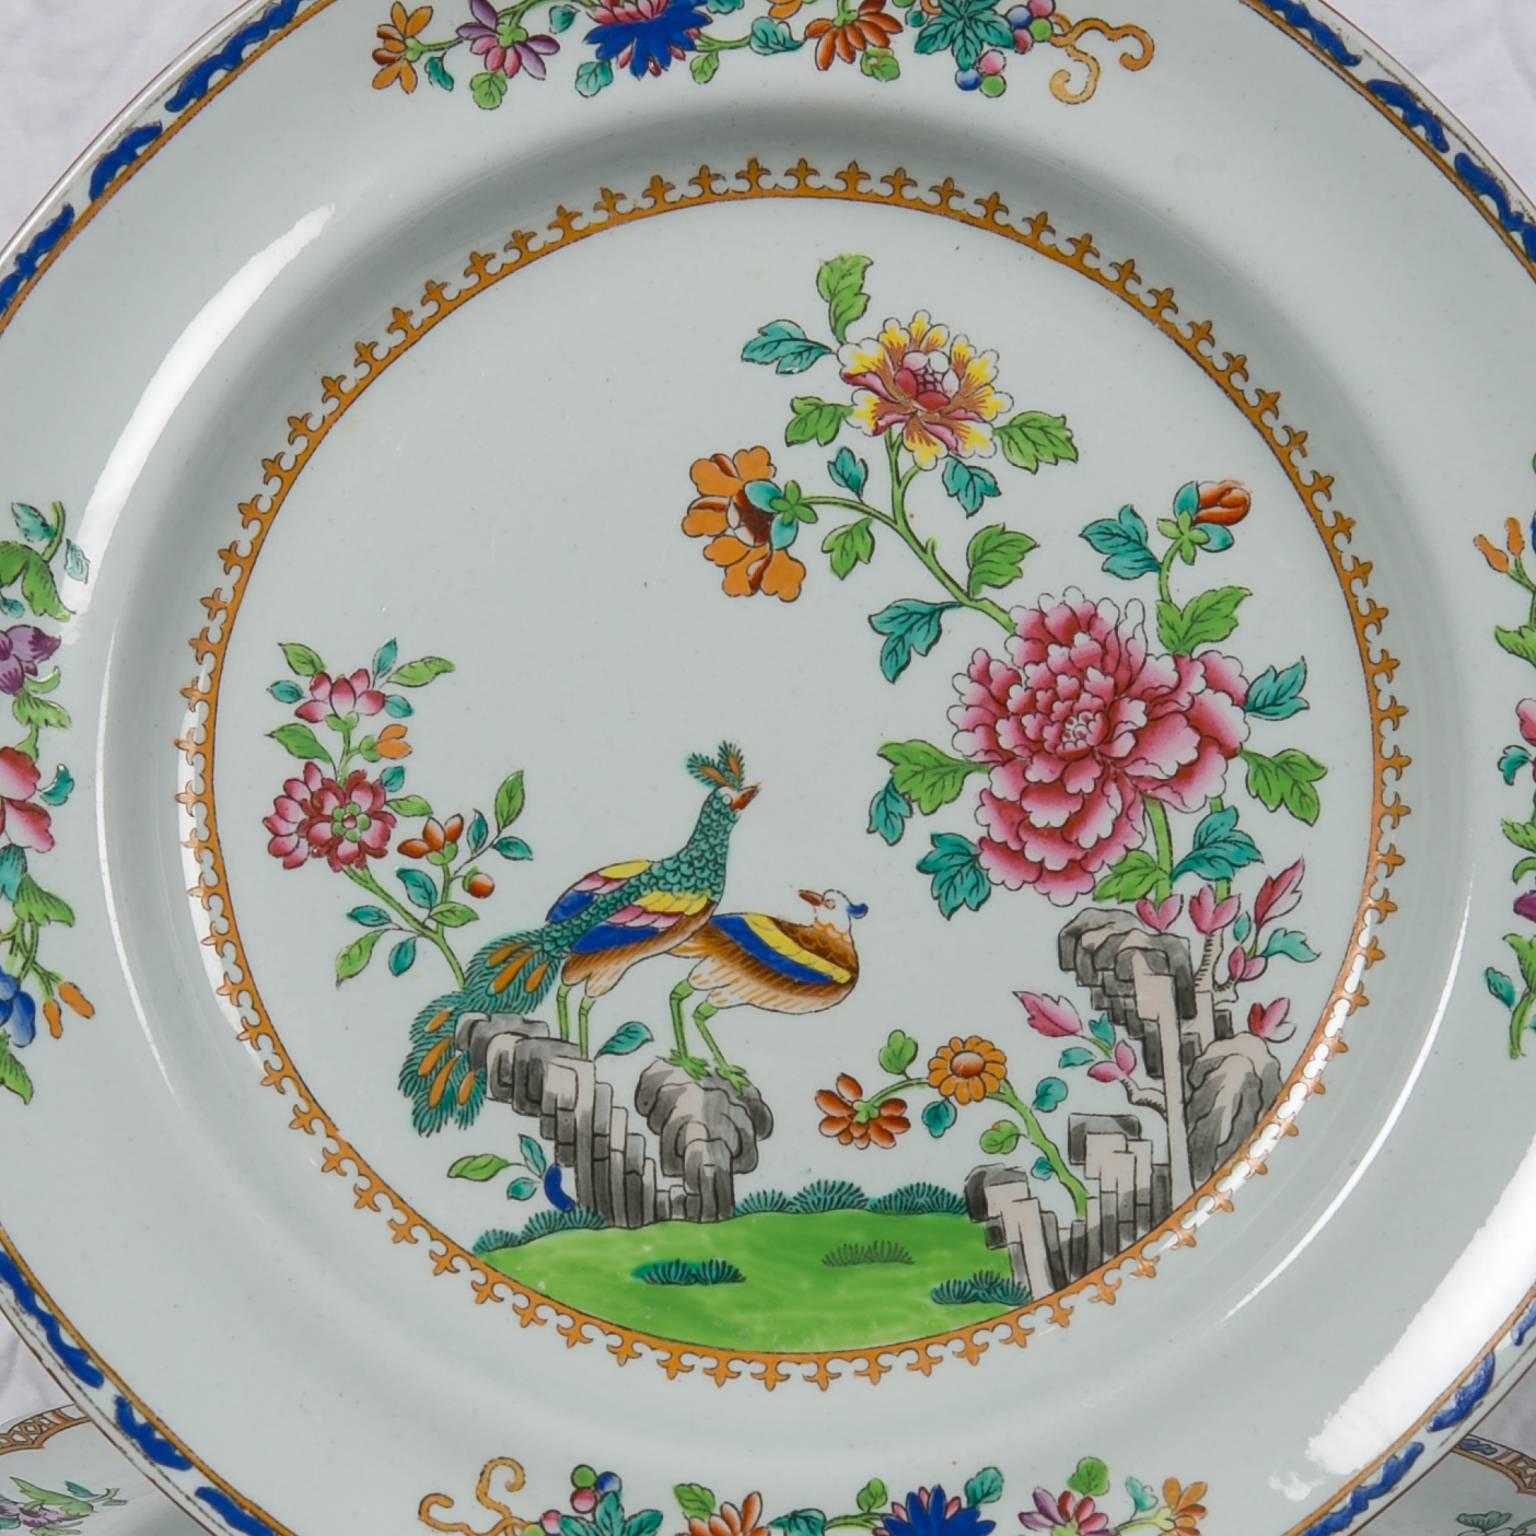 A set of Spode peacock* pattern ironstone dishes made in England, circa 1820.
The pattern shows a chinoiserie scene with a peacock and a pheasant standing on rocky outcroppings. They are set in a flowing garden with one typical oversized pink peony.